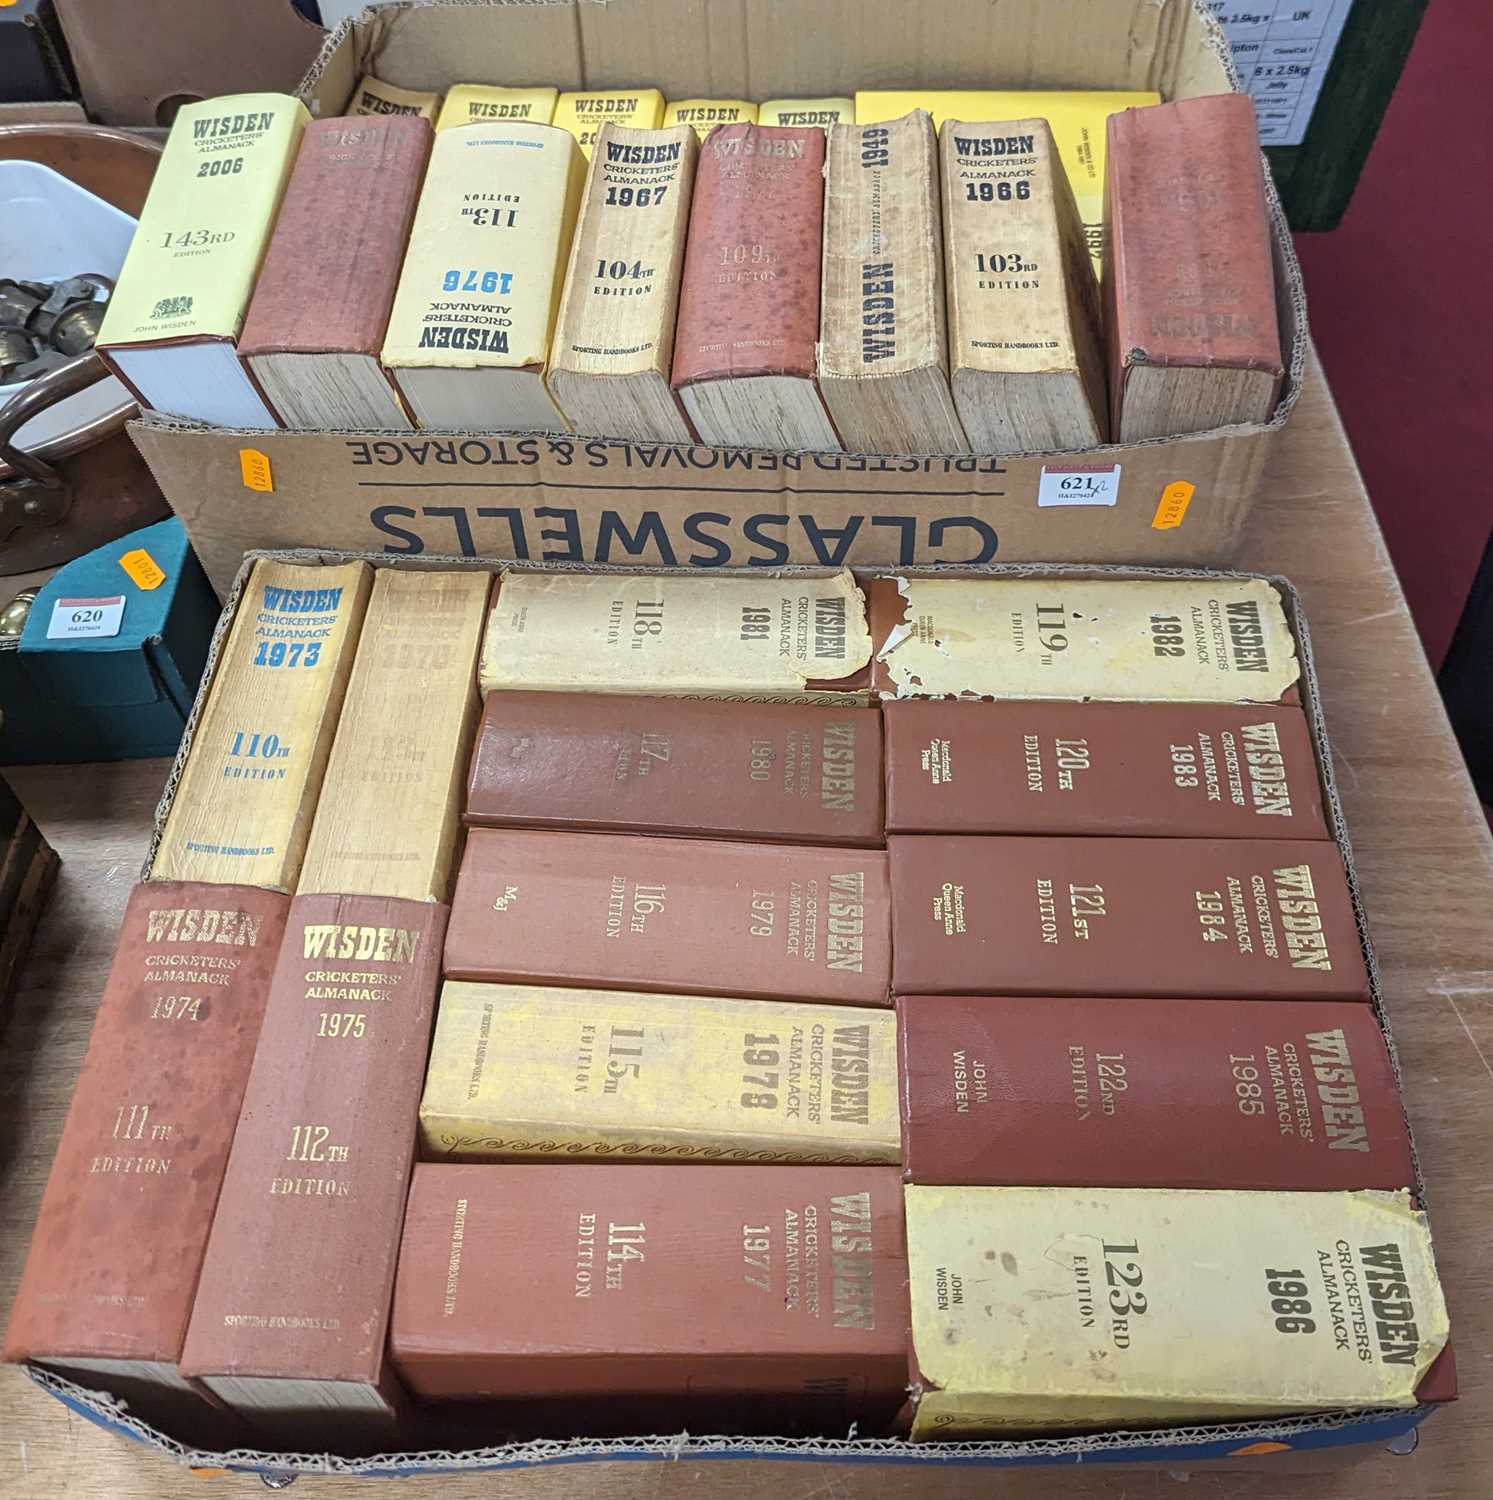 A collection of Wisden Cricketer's Almanacs, primarily from the 1960s onwards